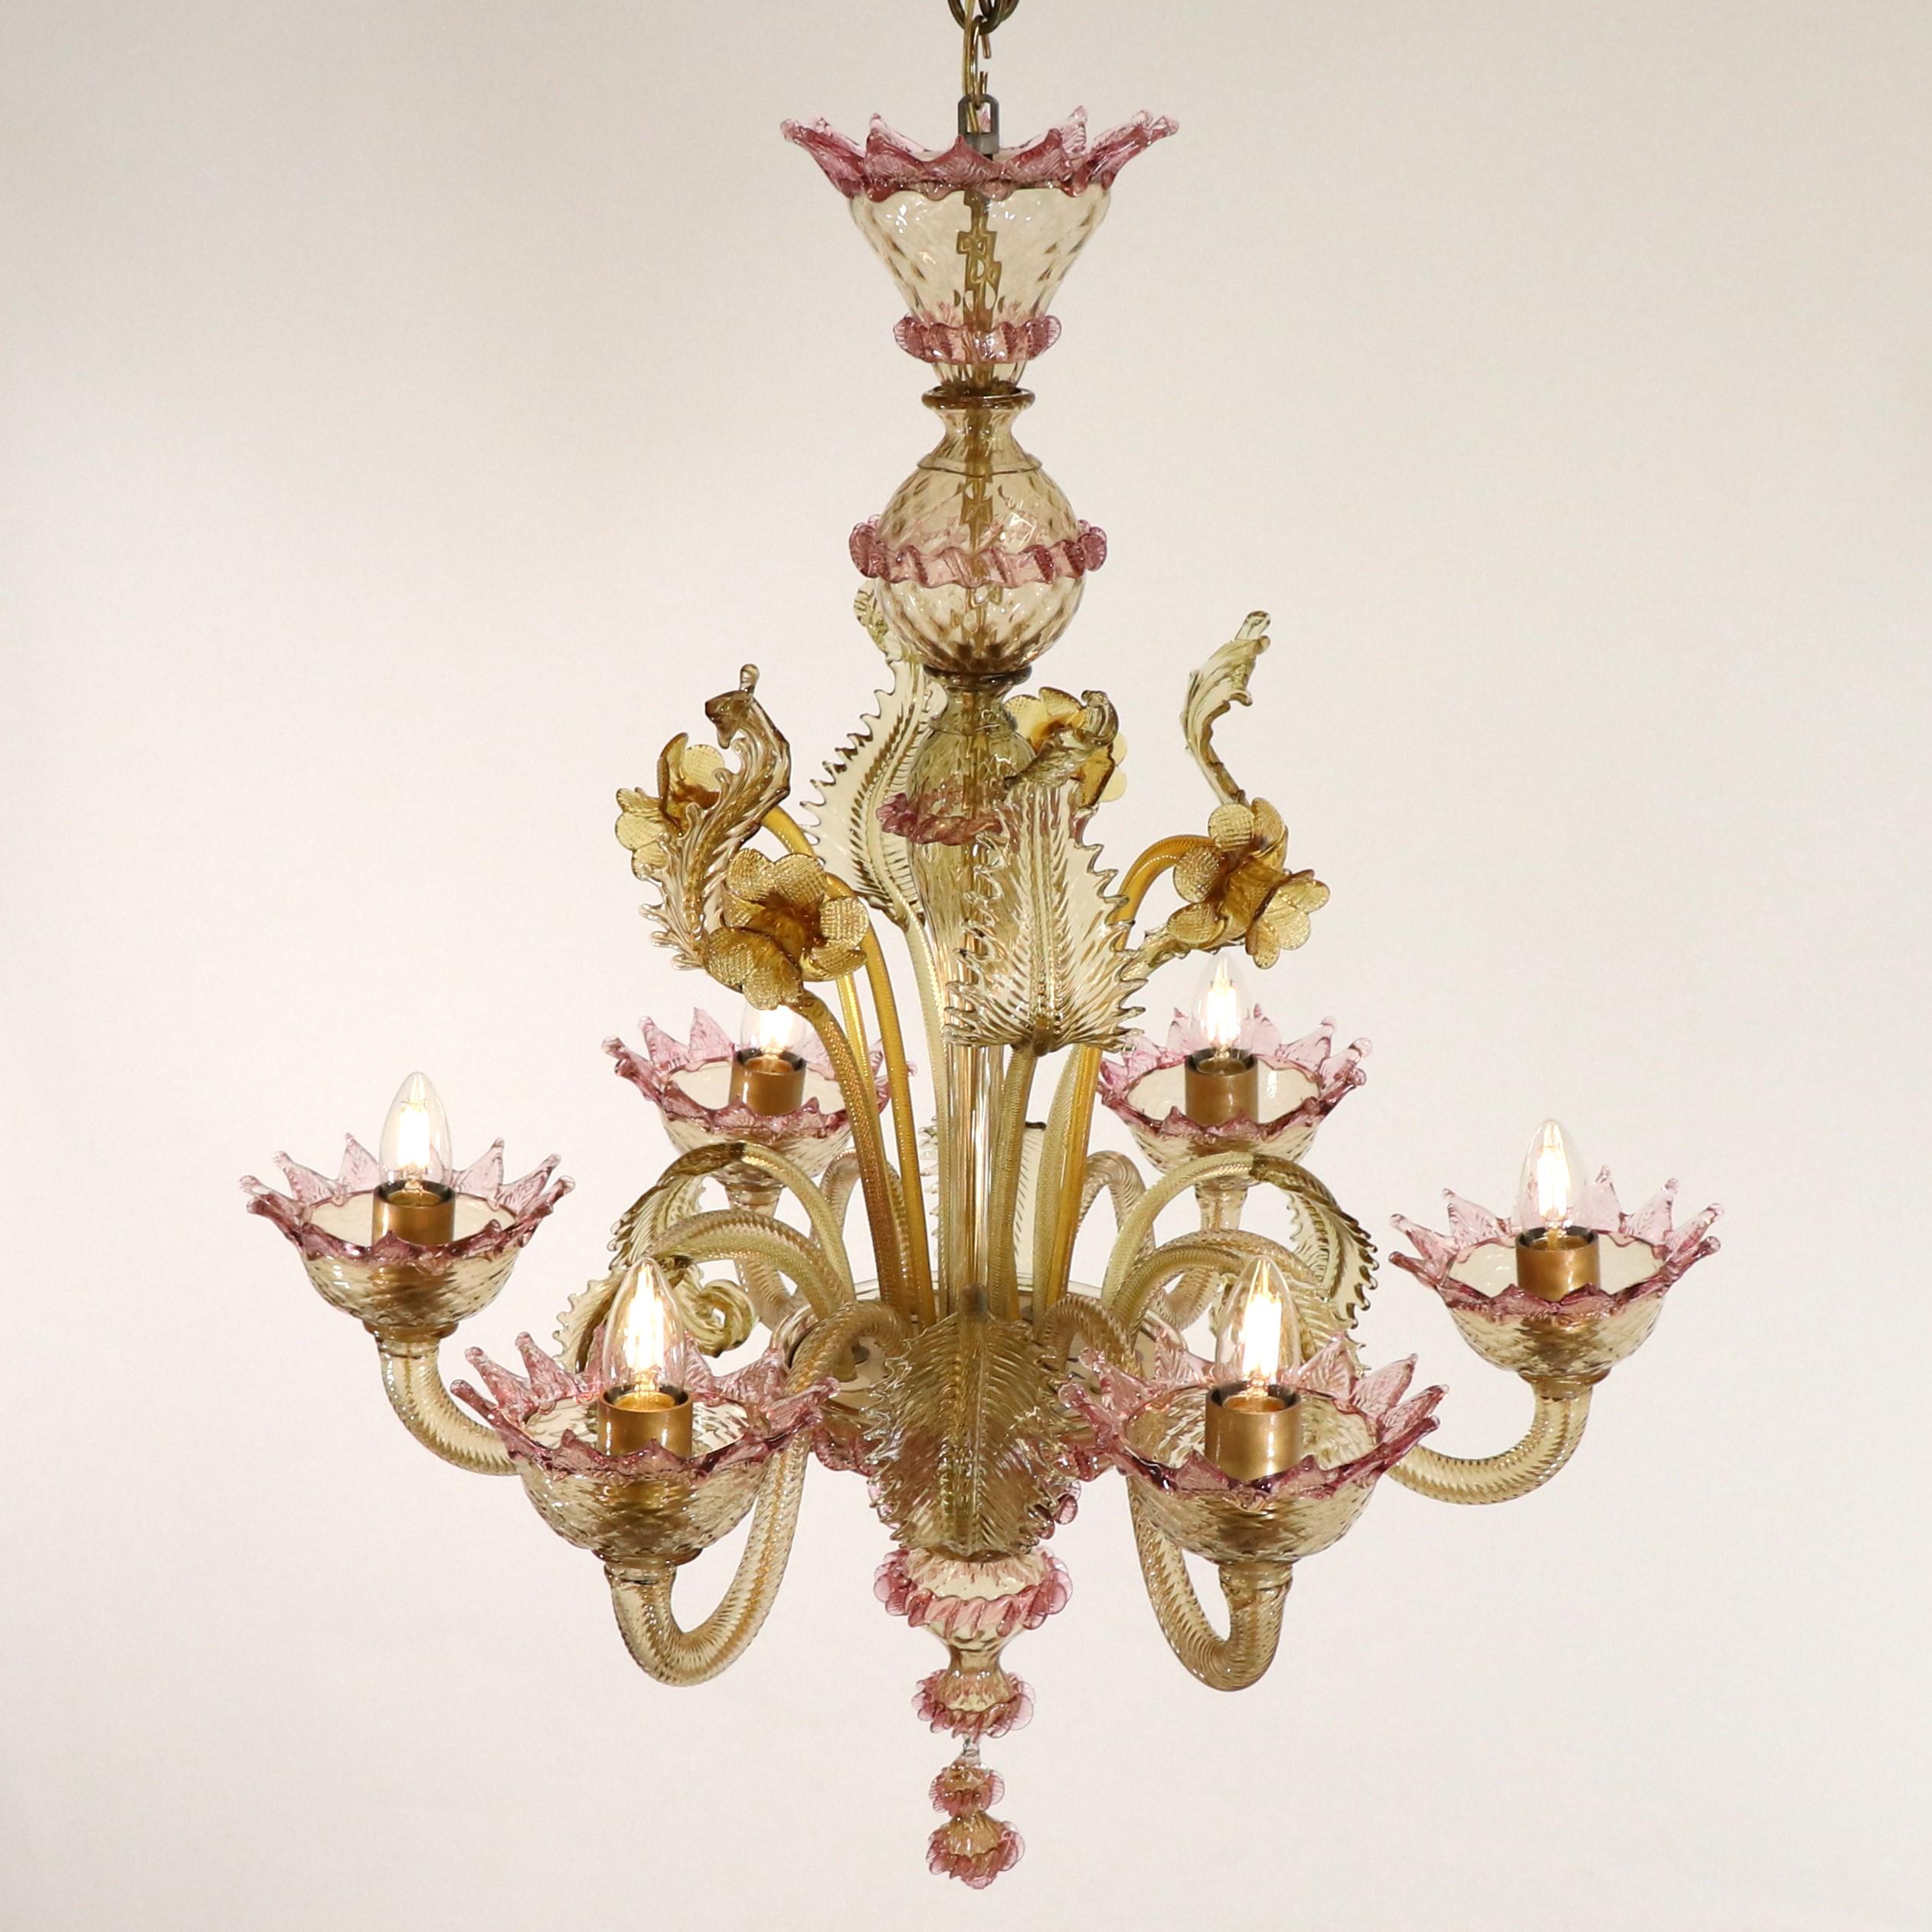 This exquisite two-toned Murano glass chandelier showcases a mastery of Venetian glass craftsmanship. Featuring a bulbous center column with sprouting details, stylized here with daffodils and leaves, and six scroll arms that hold bobeches with